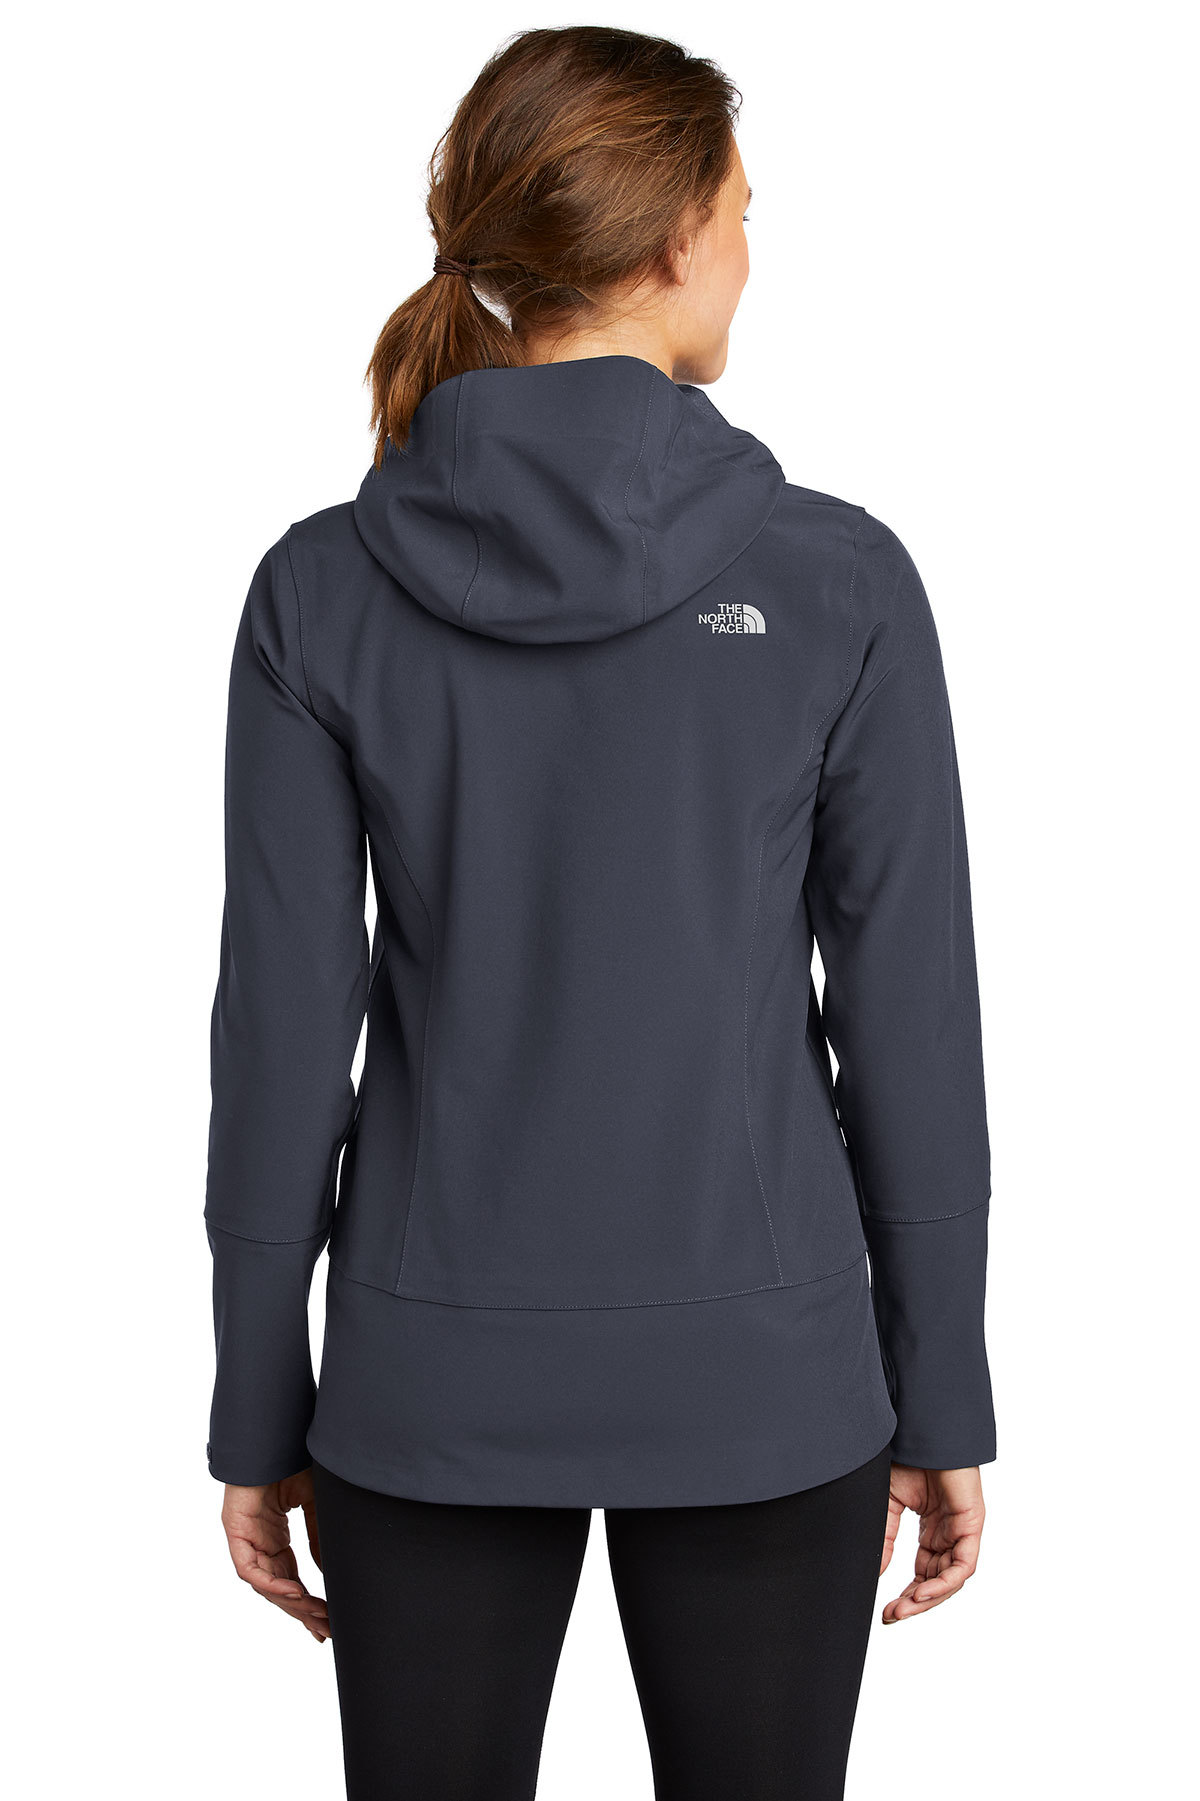 The North Face Ladies Apex DryVent Jacket | Product | SanMar